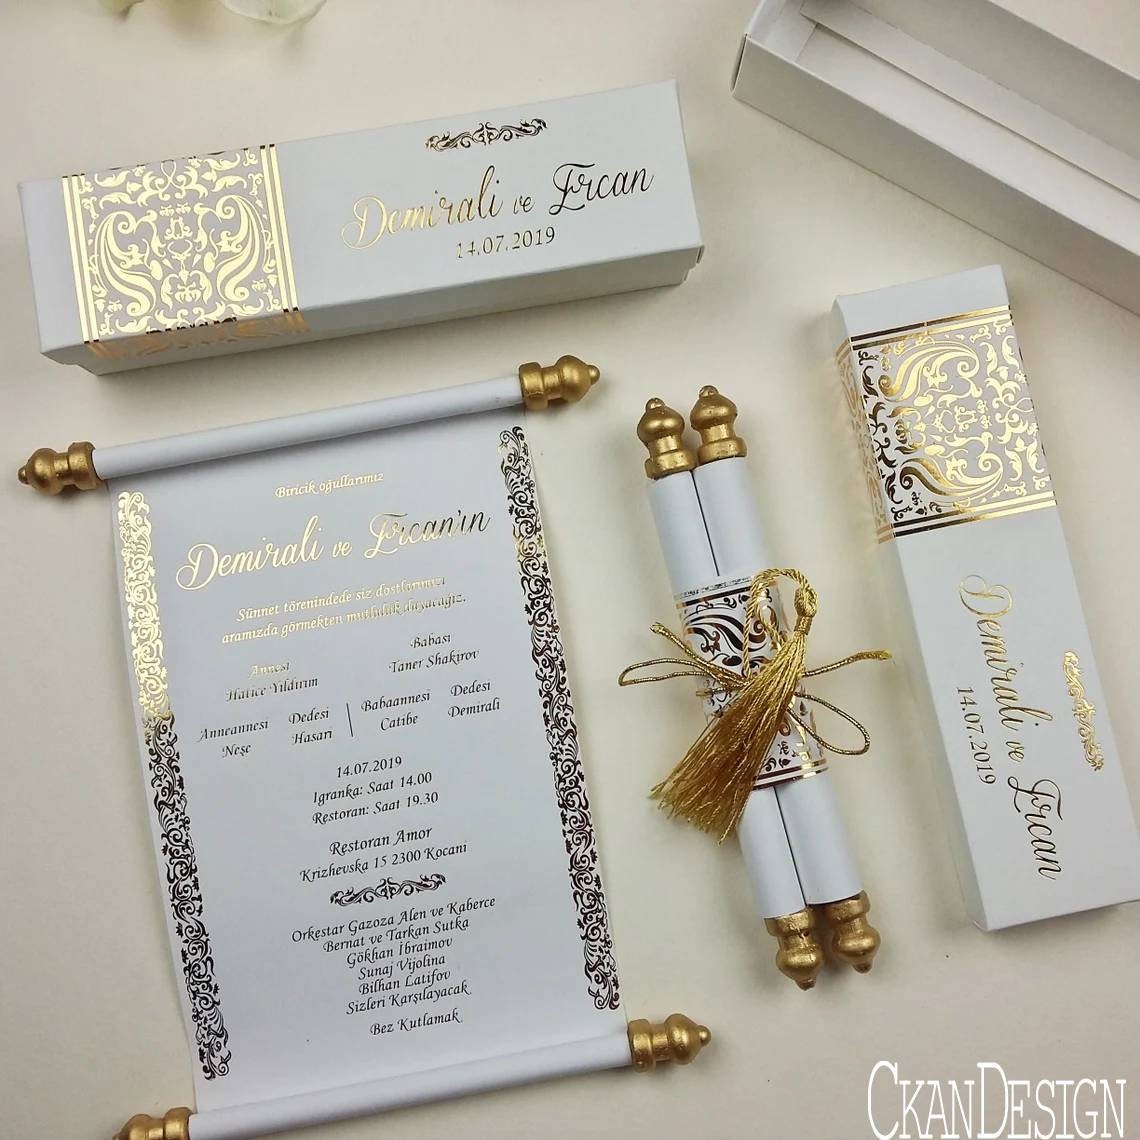 S865, Gold Color, Shimmery Finish Paper, Scroll Invitations, Jewish  Invitations, Anniversary Invitations, Only Scrolls.